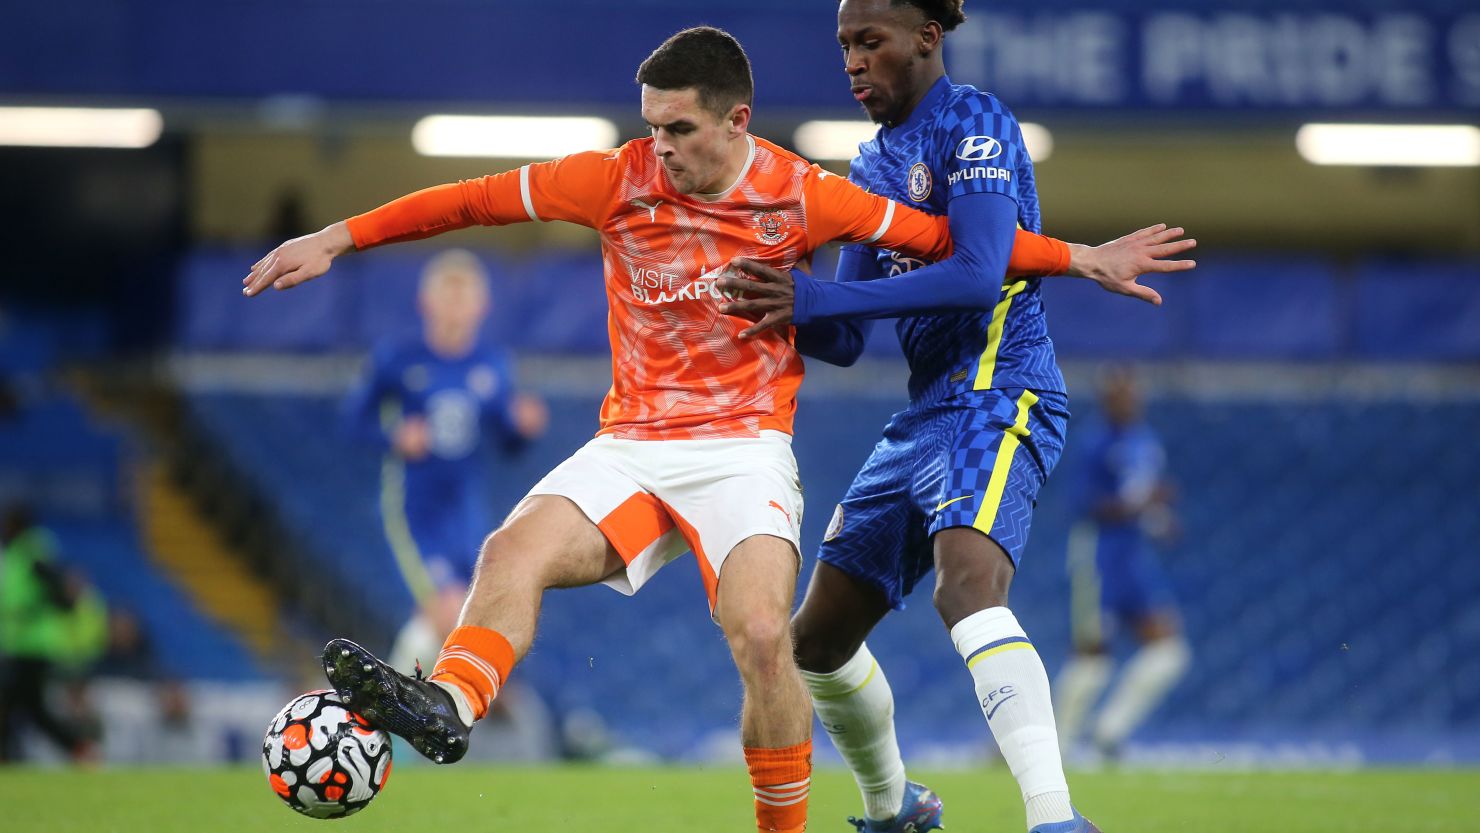 Jake Daniels has recently broken into the first team at Blackpool, a club in English football's second tier. 